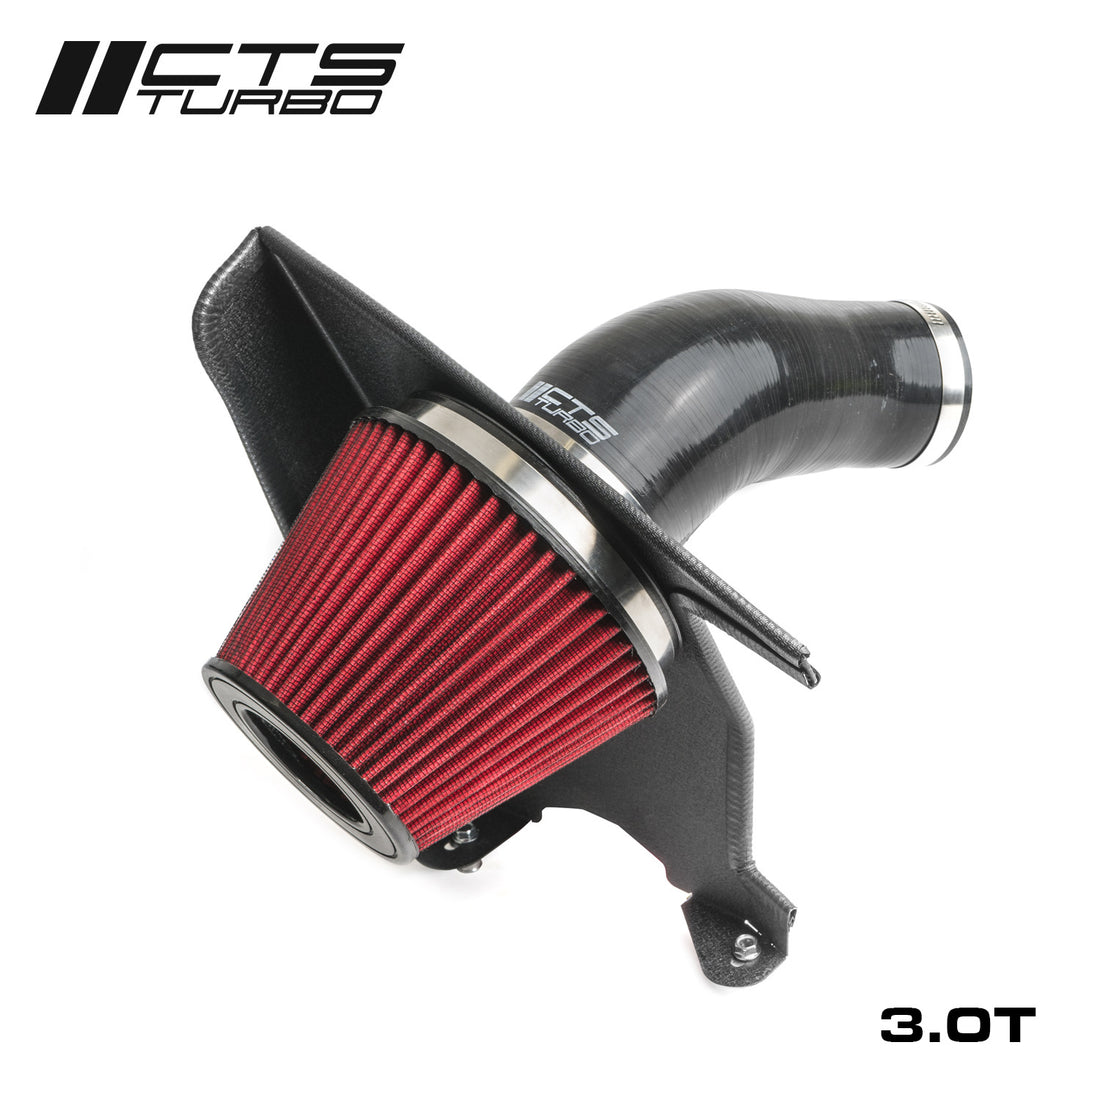 CTS TURBO B9 AUDI A4; AllRoad; A5; S4; S5; RS4 HIGH-FLOW INTAKE (6" Velocity Stack) CTS Turbo IT-290R